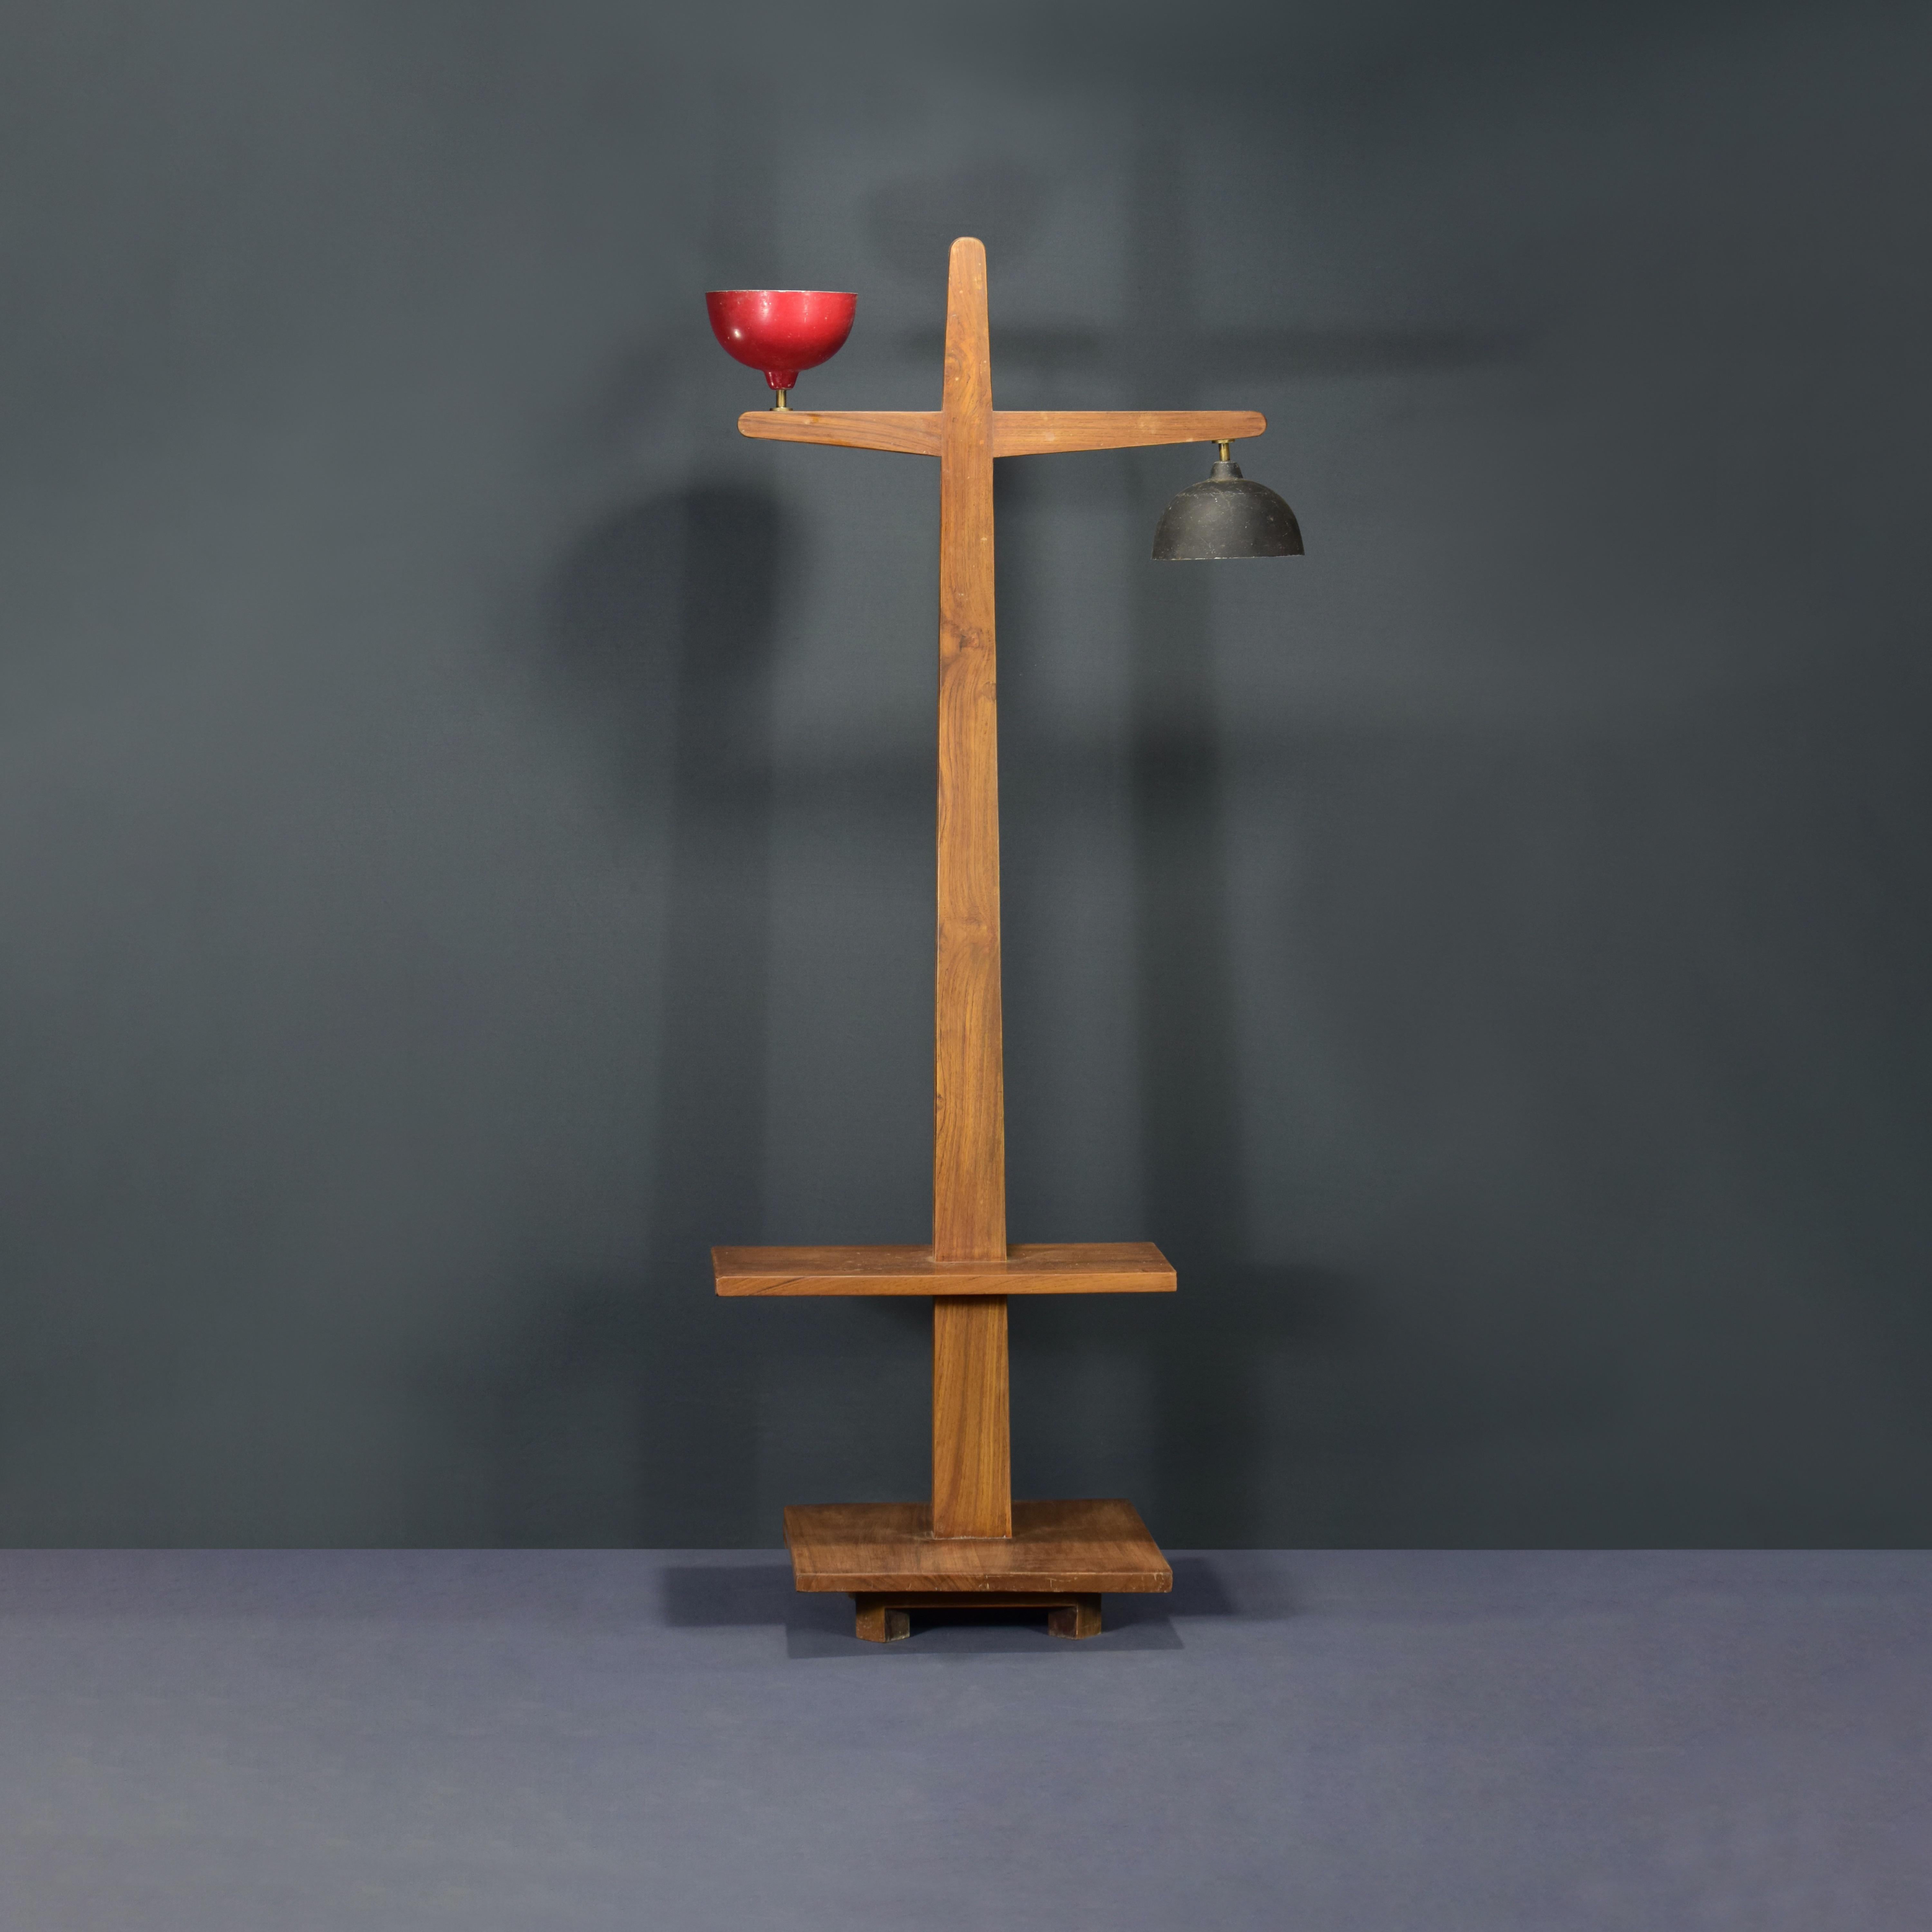 This lamp is not only a fantastic piece, it’s a rare collectors item. Designed by Pierre Jeanneret, Eulie Chowdhury and Jeet Malhotra. It is raw in its simplicity, embodying an expressing a nonchalance. It is a beautiful piece that could be put in a